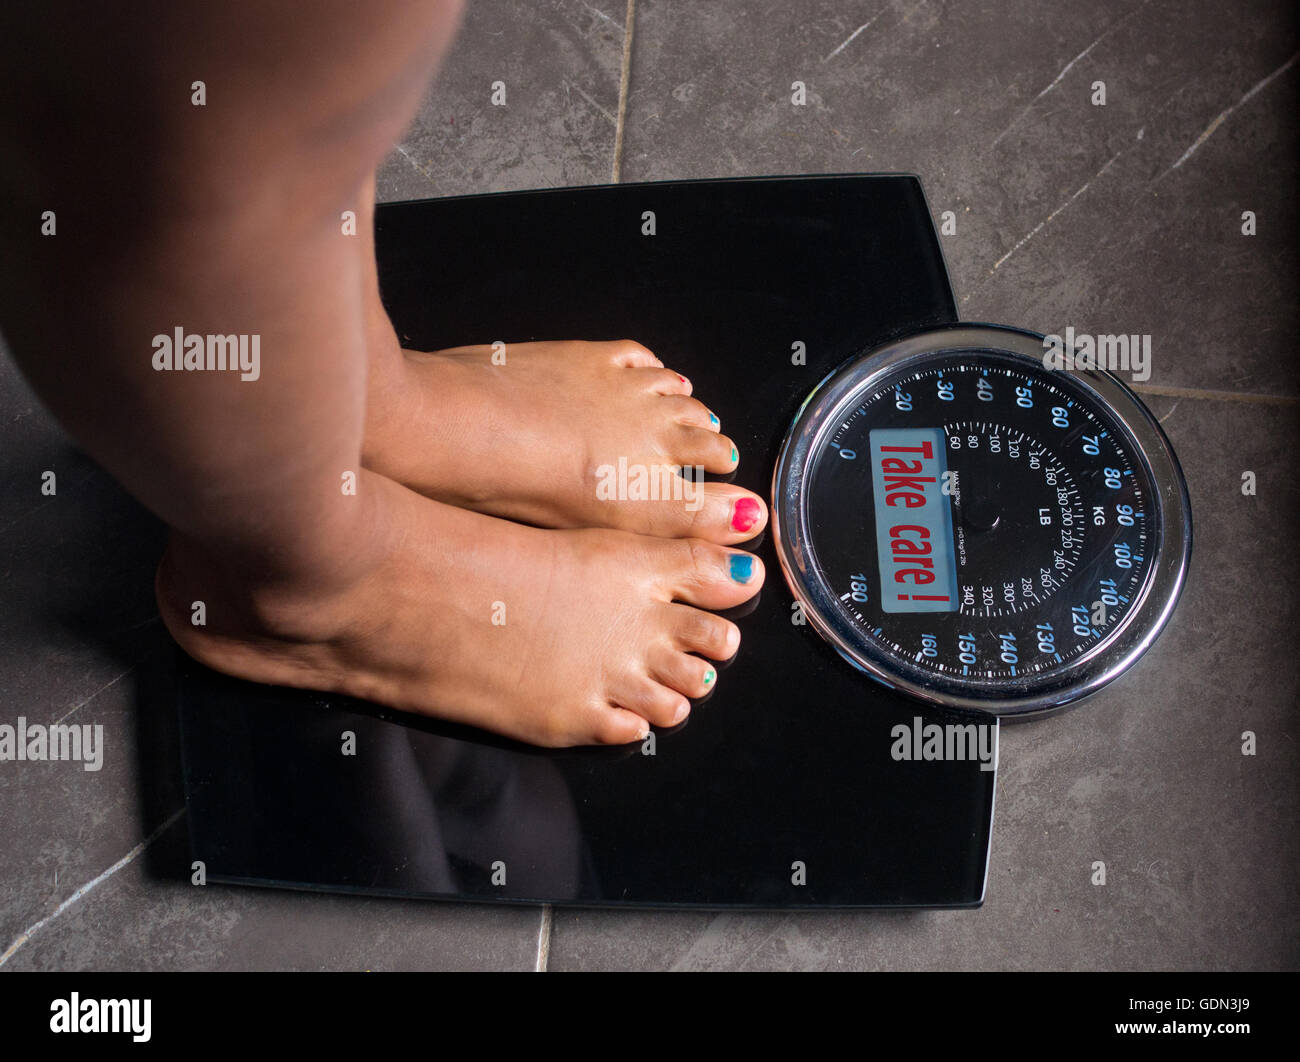 https://c8.alamy.com/comp/GDN3J9/the-bathroom-scales-that-speaks-to-you-telling-you-the-truth-by-writing-GDN3J9.jpg